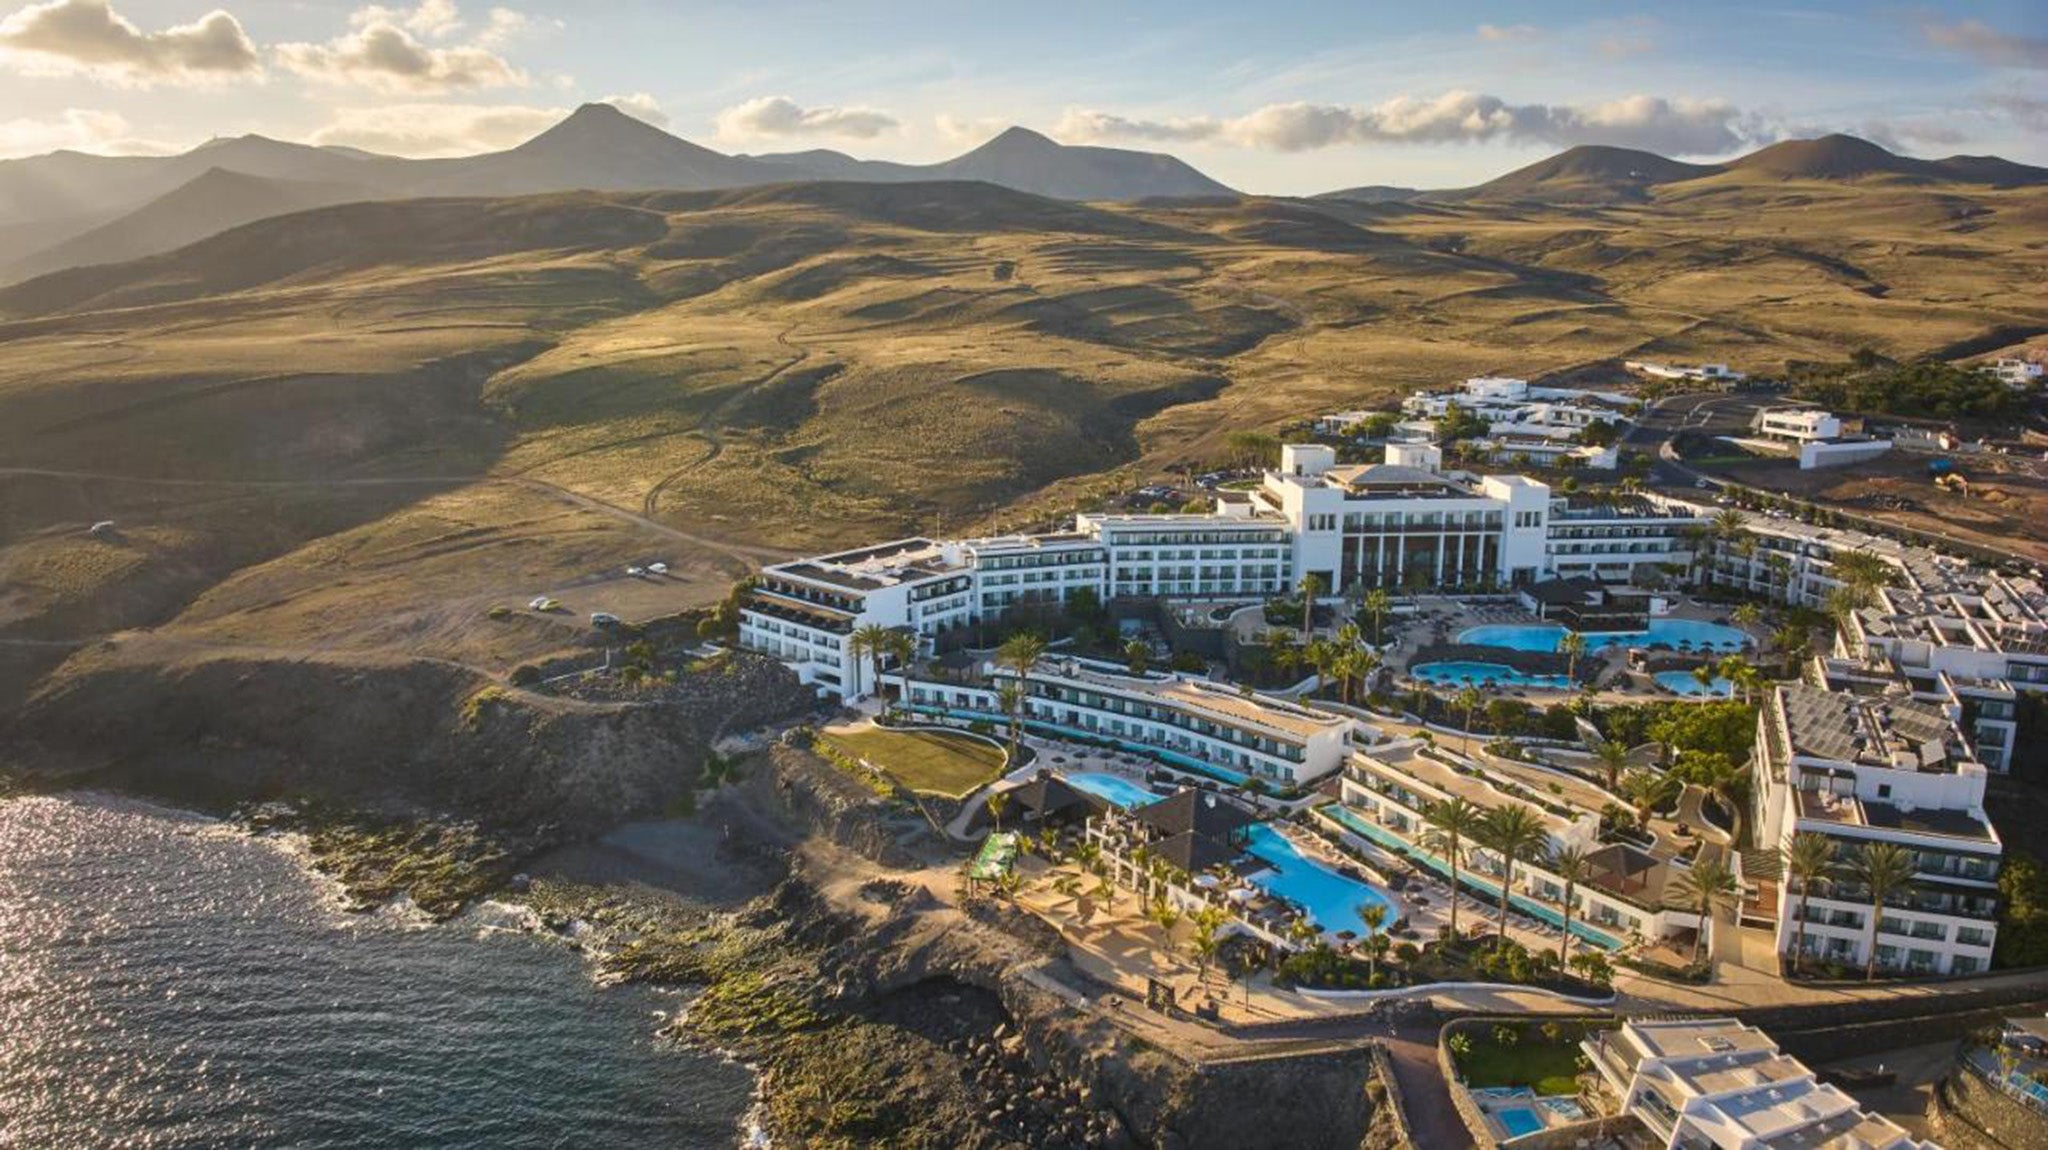 Enjoy the nearby black volcanic sand beaches during a stay at Secrets Lanzarote Resort and Spa